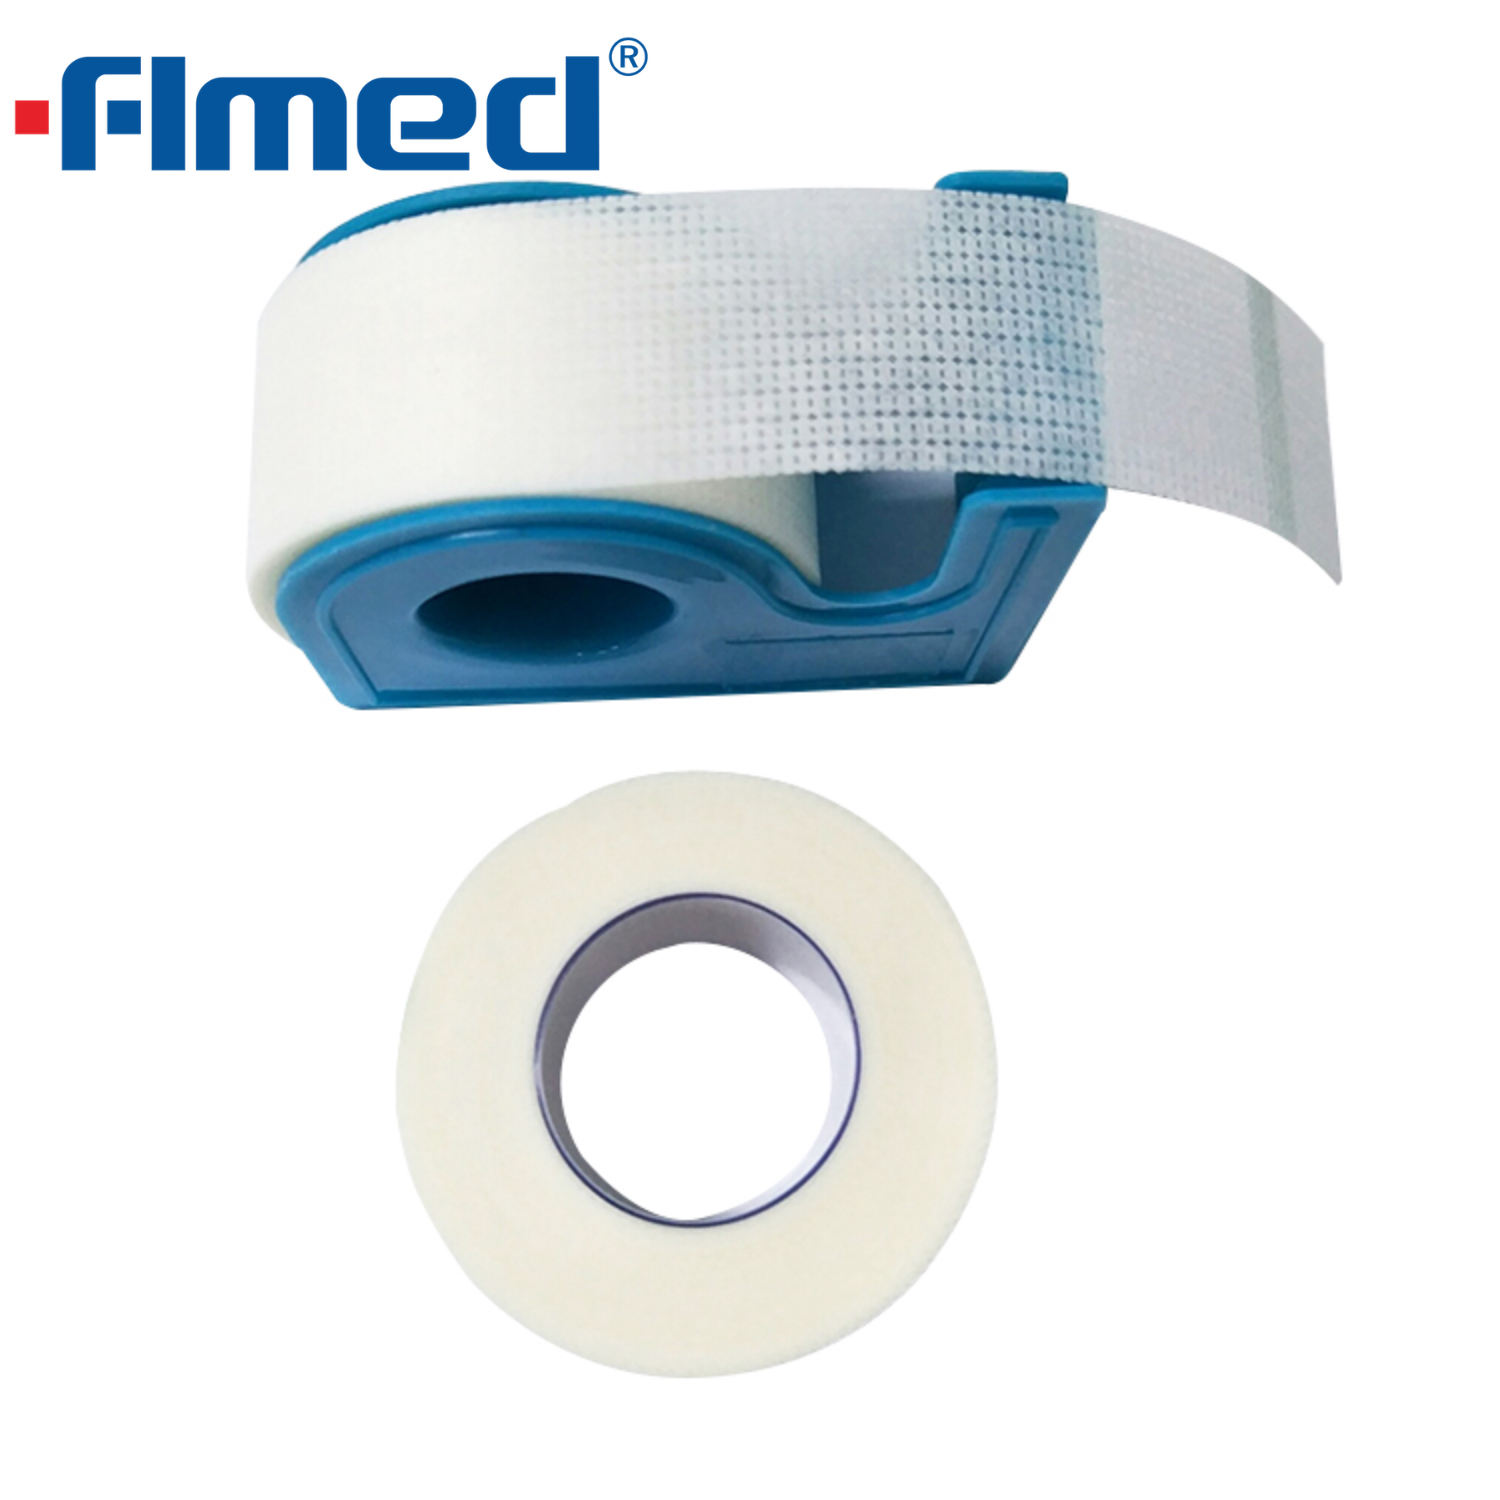 Medical Non Woven Adhesive Wound Dressing Tape Roll